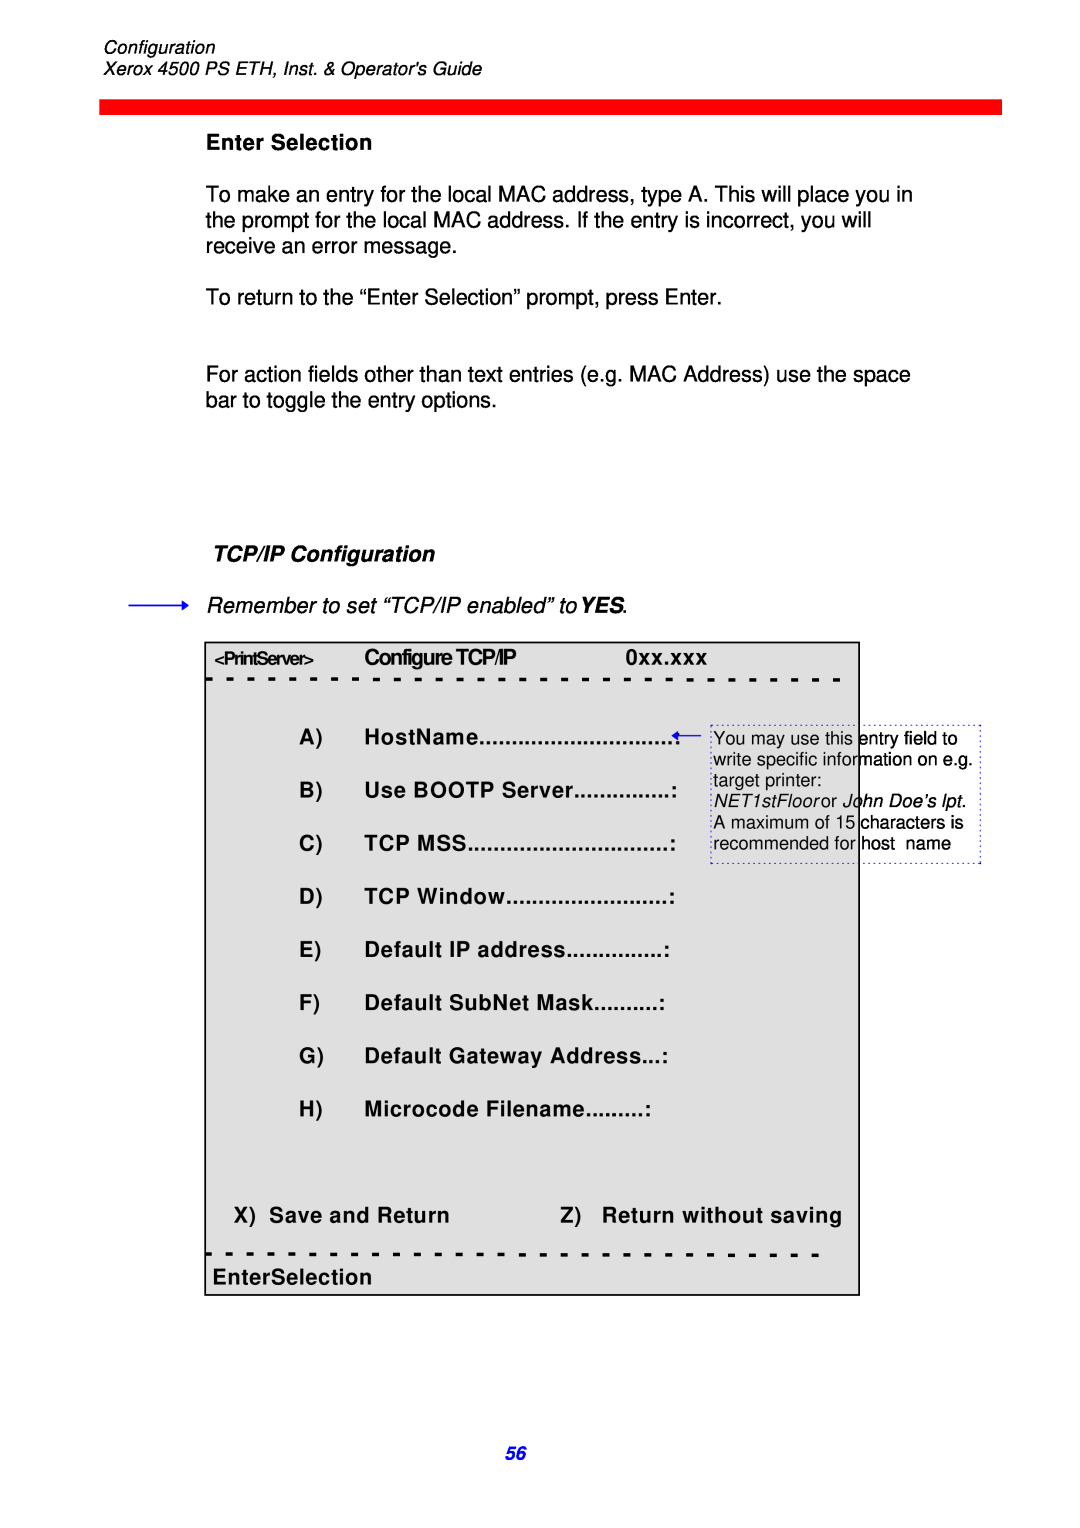 Xerox 4500 ps eth TCP/IP Configuration, Remember to set “TCP/IP enabled” to YES, ConfigureTCP/IP, HostName, EnterSelection 